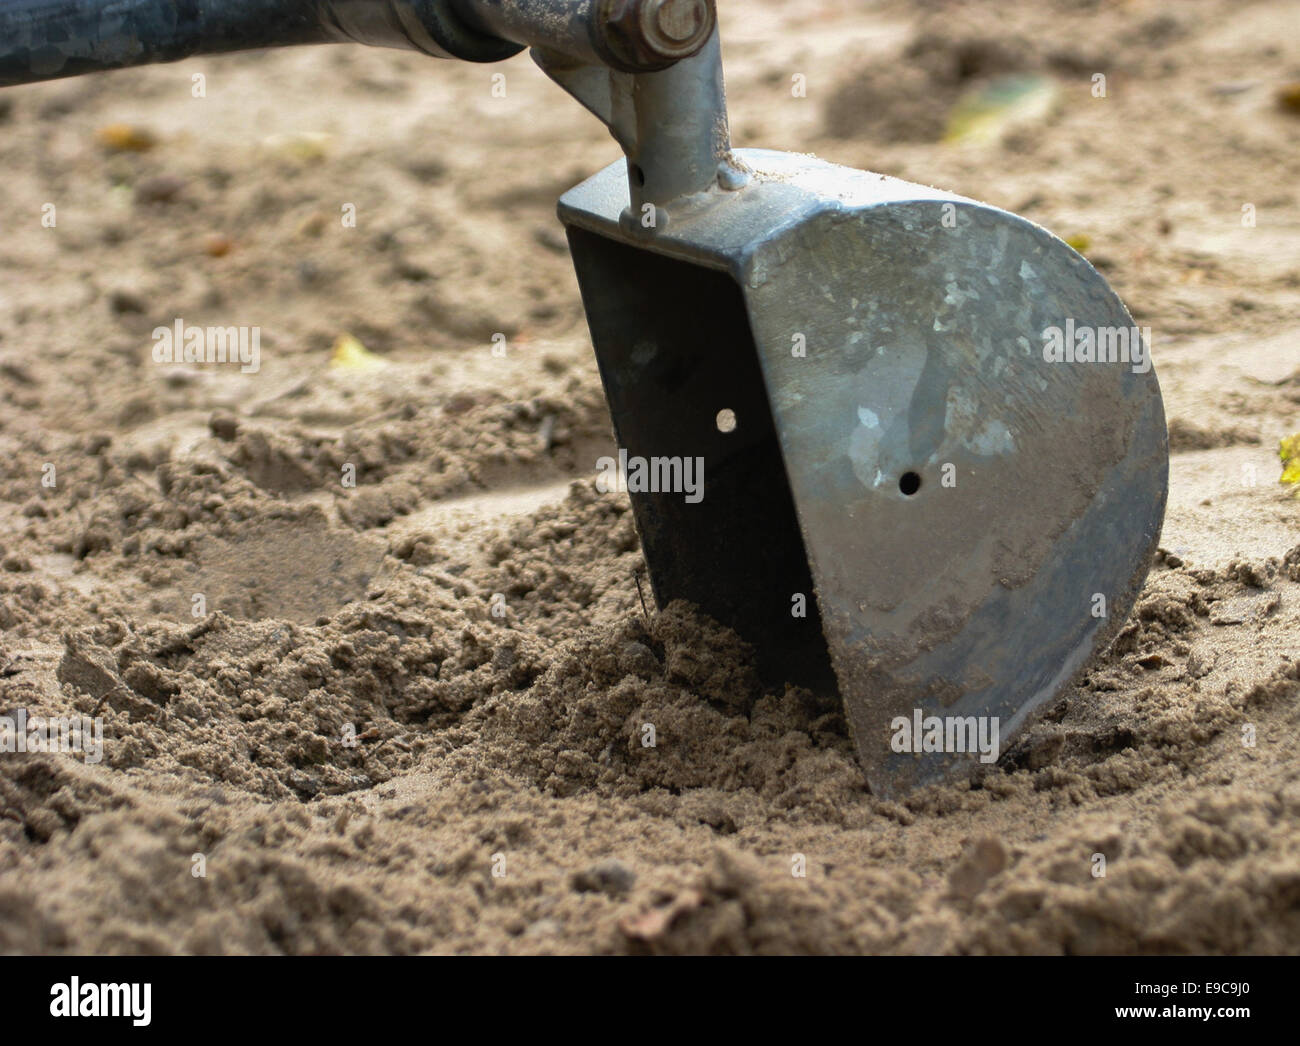 Child's sit on sand digger bucket digging in sand Stock Photo